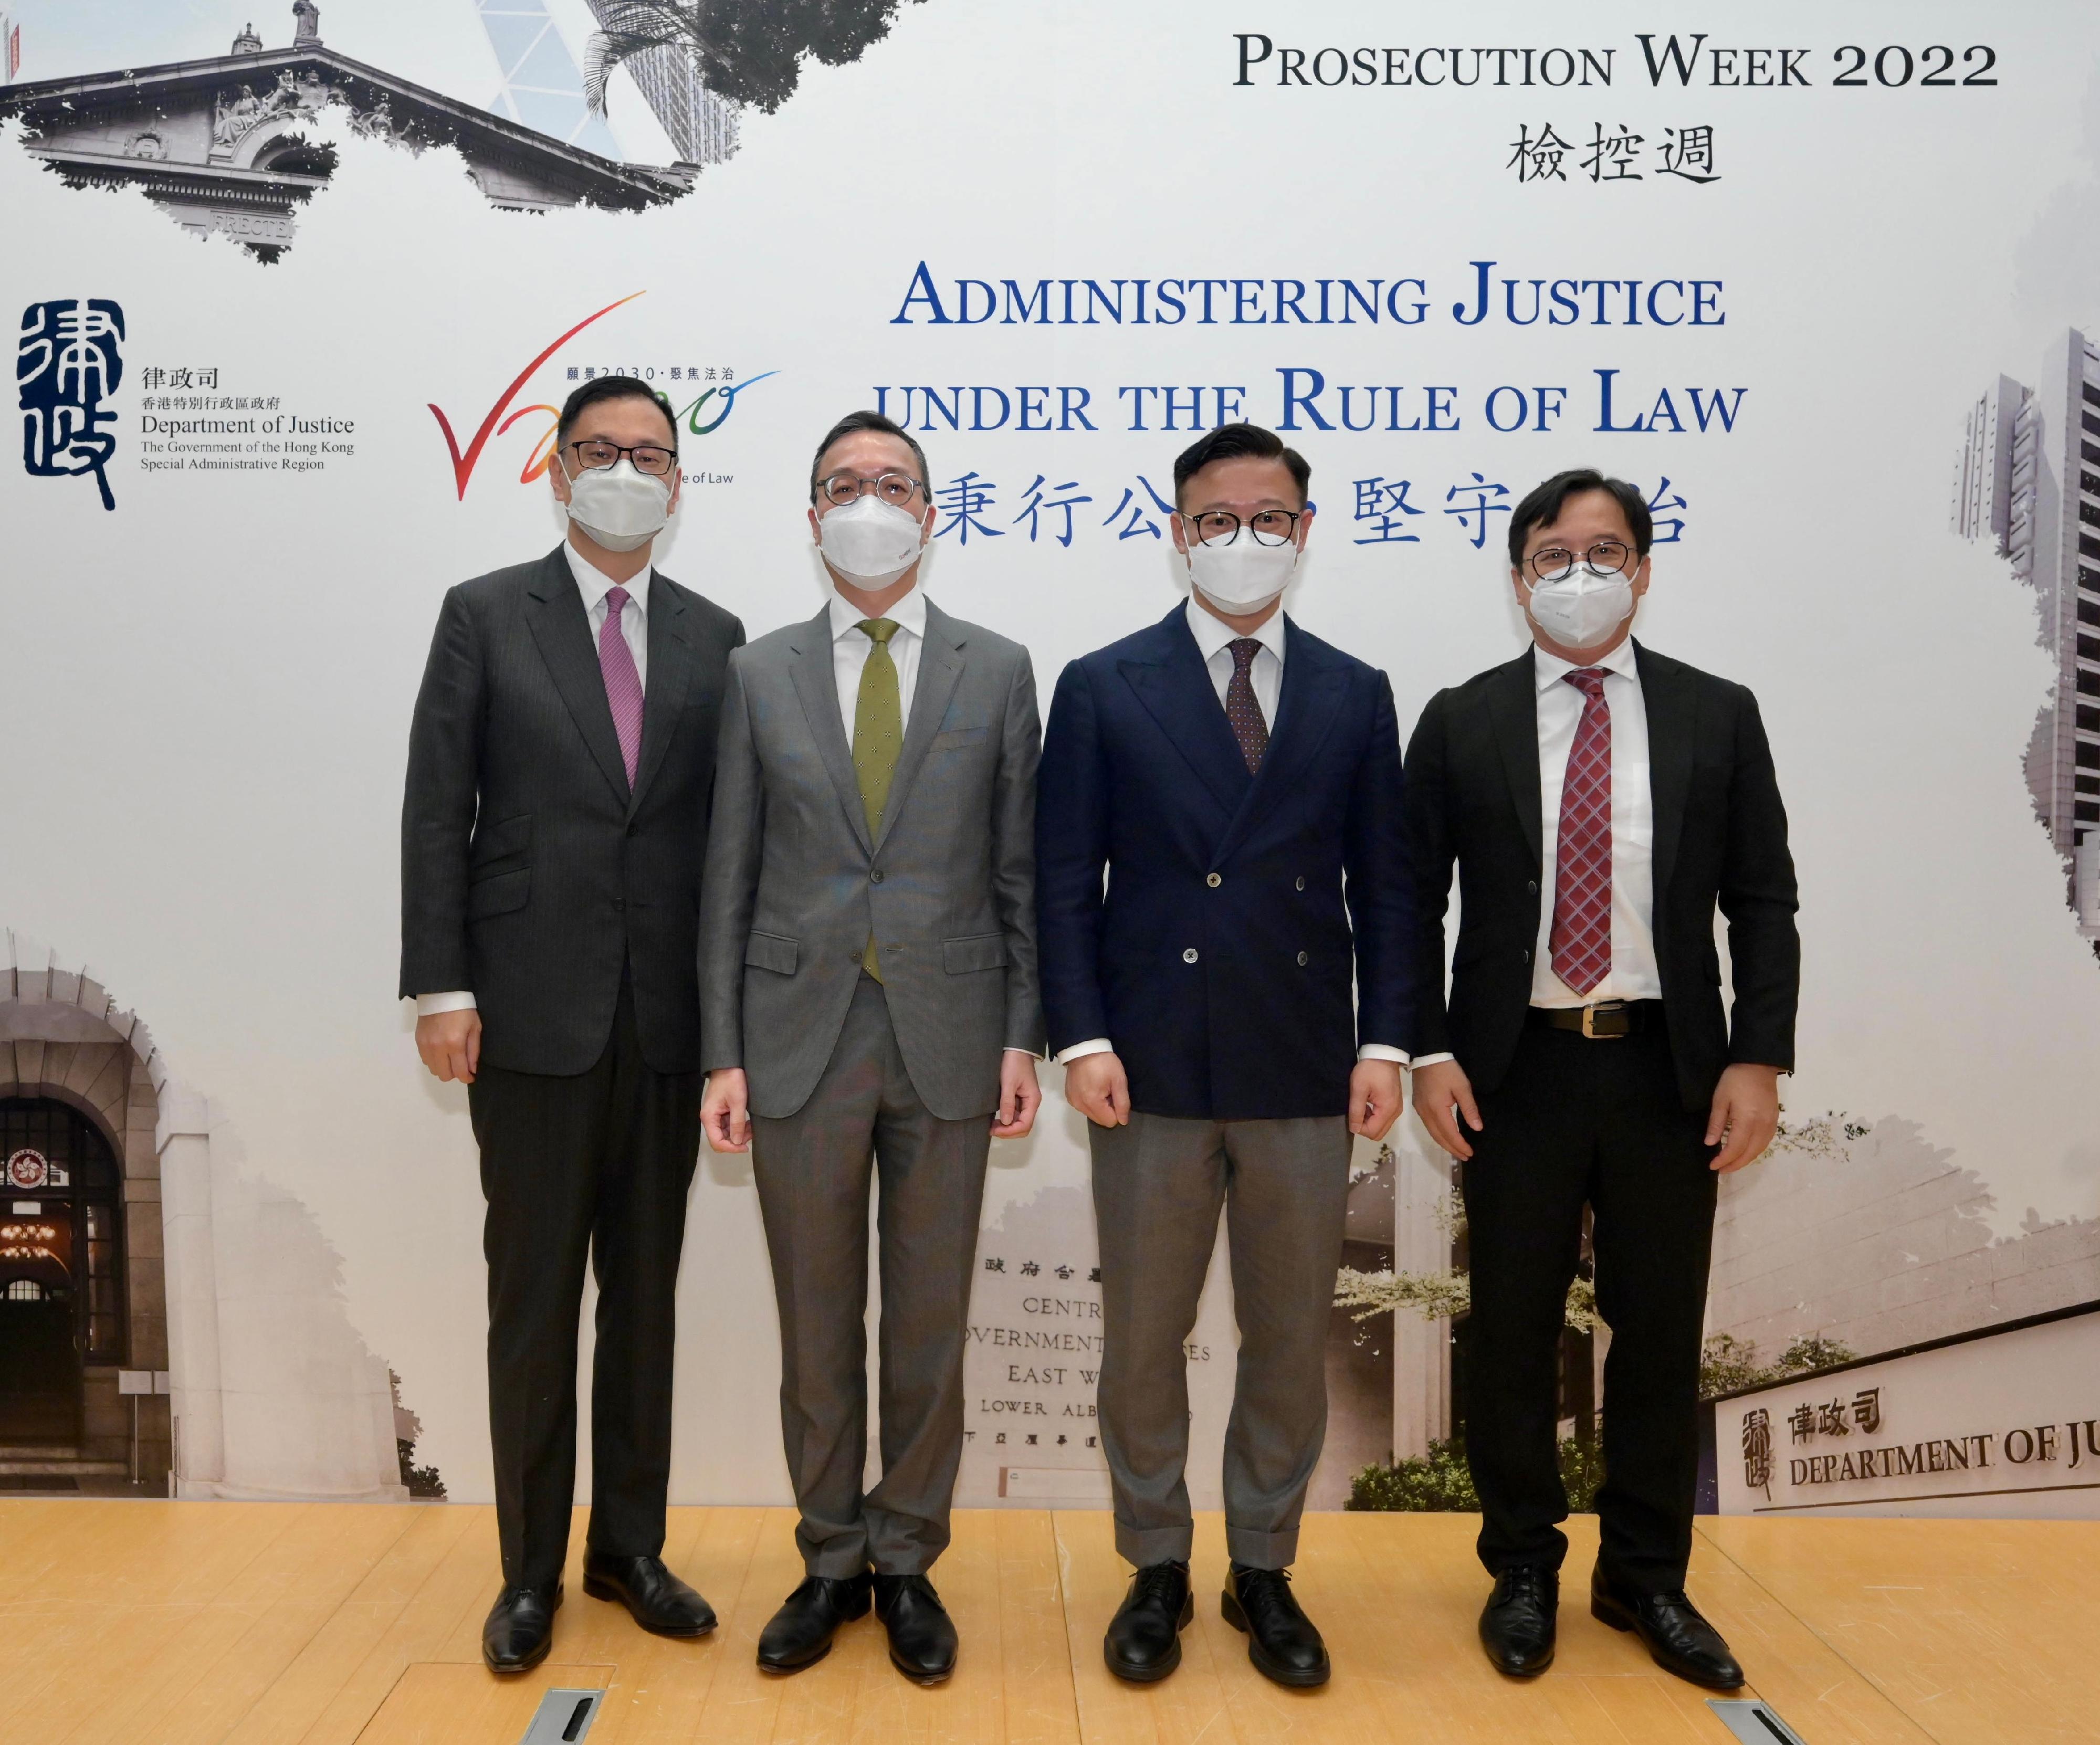 The Secretary for Justice, Mr Paul Lam, SC (second left), and the Deputy Secretary for Justice, Mr Cheung Kwok-kwan (second right), are pictured with the Chairman of the Hong Kong Bar Association, Mr Victor Dawes, SC (first left), and the President of the Law Society of Hong Kong, Mr Chan Chak-ming (first right), at the opening ceremony of Prosecution Week 2022 today (August 3).

